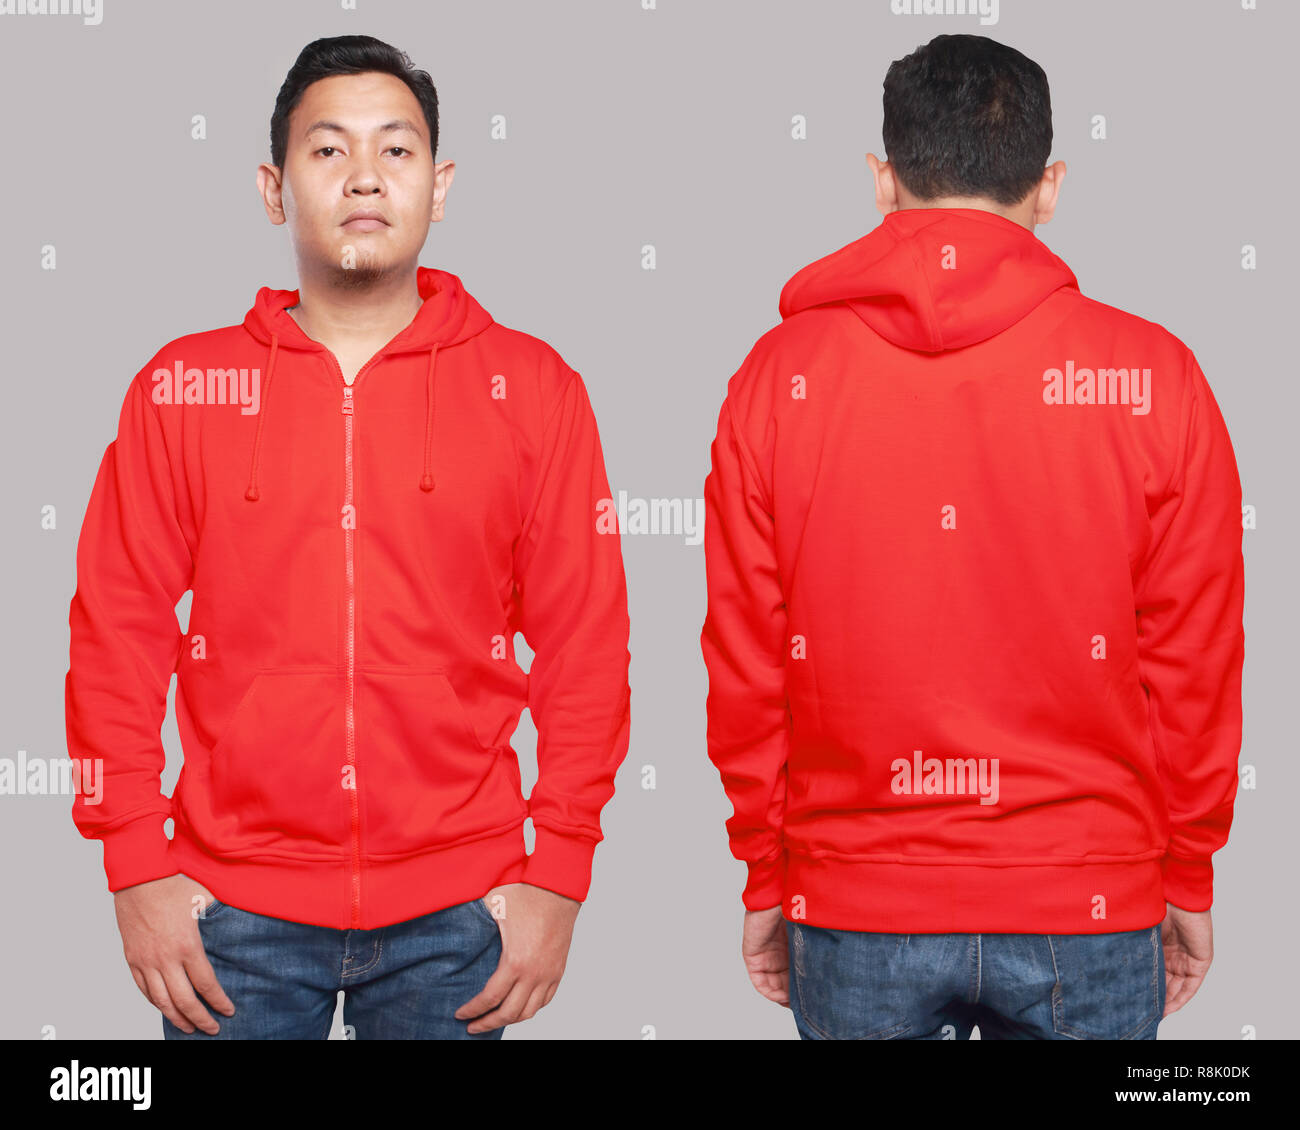 Blank sweatshirt mock up, front, and back view, isolated on grey. Asian male model wear plain red hoodie mockup. Hoody design presentation. Jumper for Stock Photo